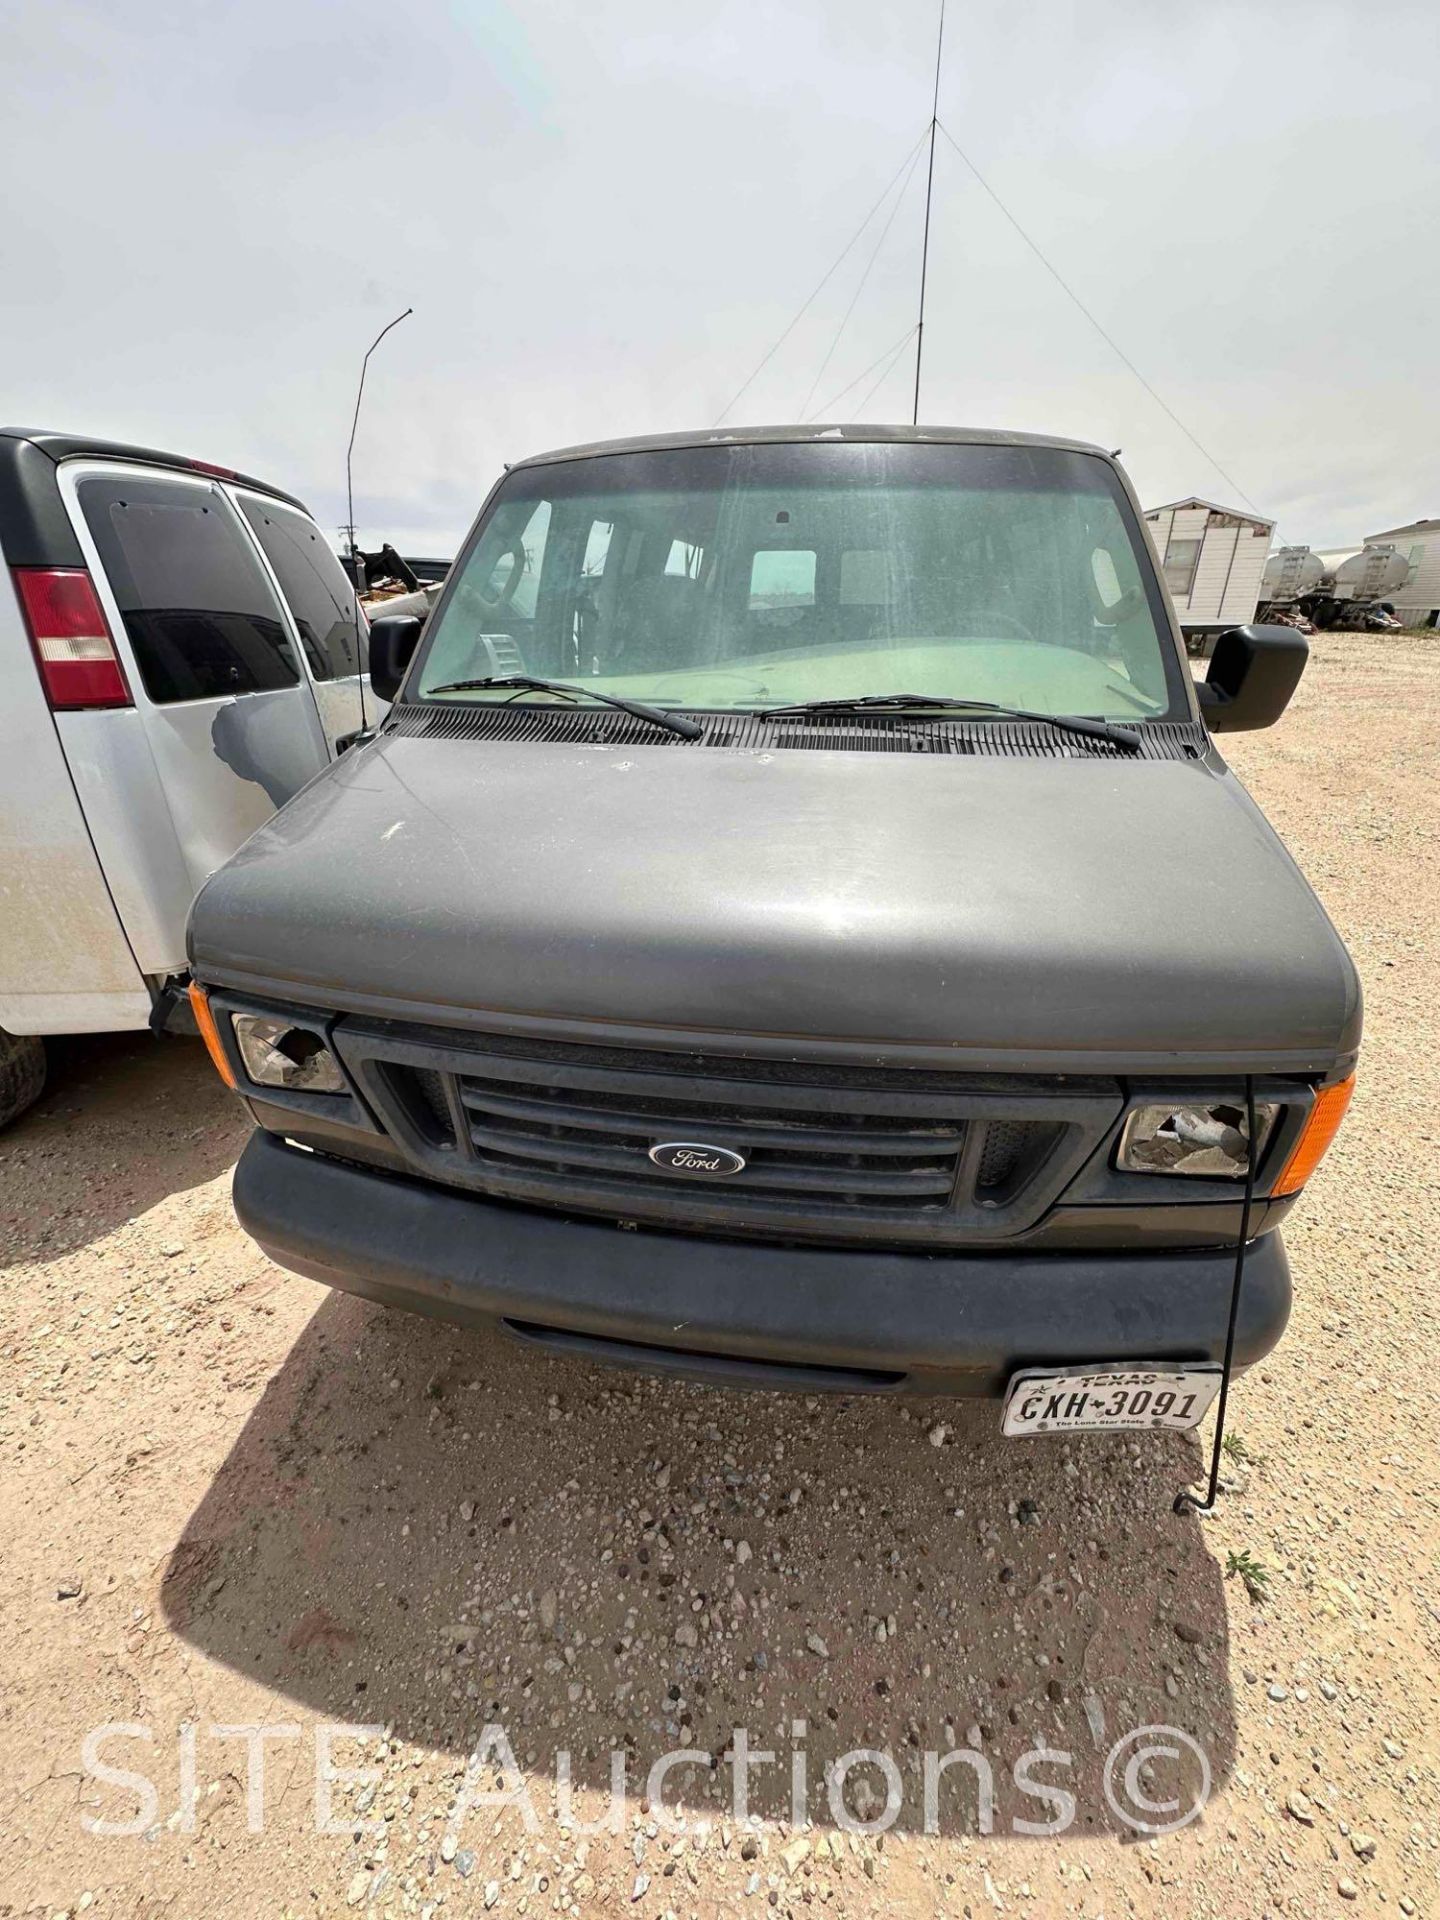 2007 Ford E350 Van - Image 2 of 15